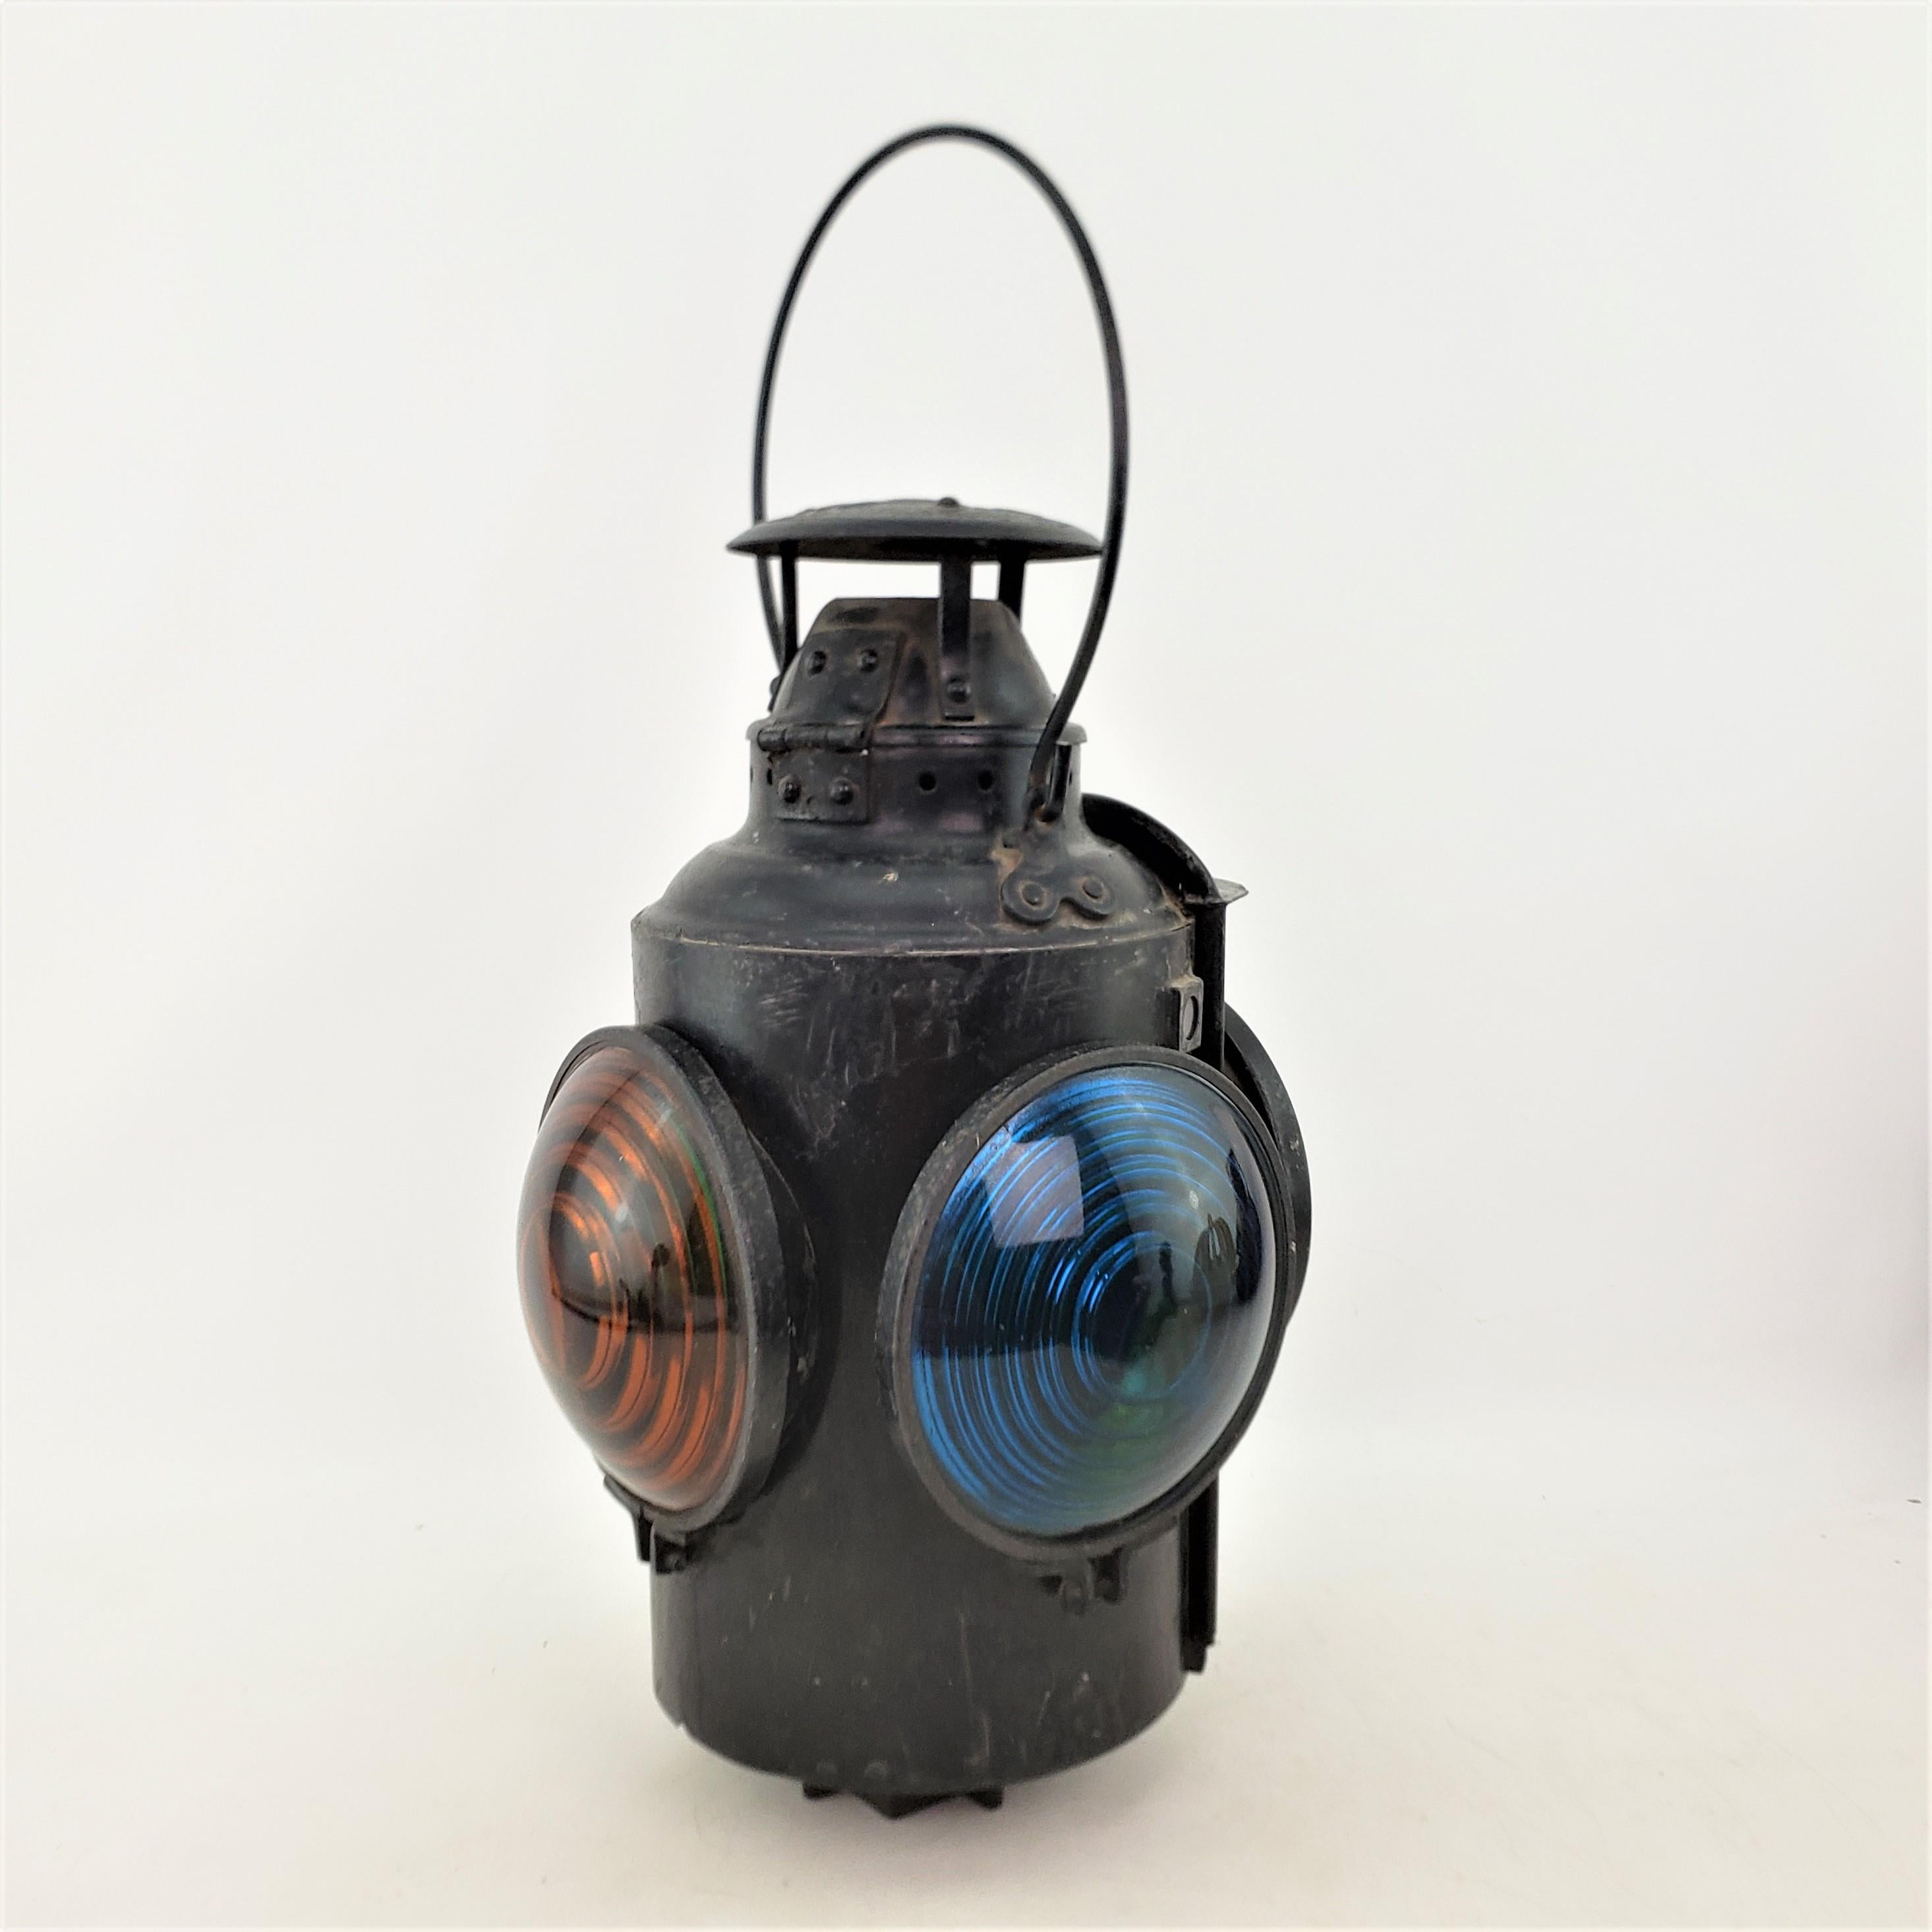 Art Deco Antique Canadian National Railway Piper Signal Lantern For Sale